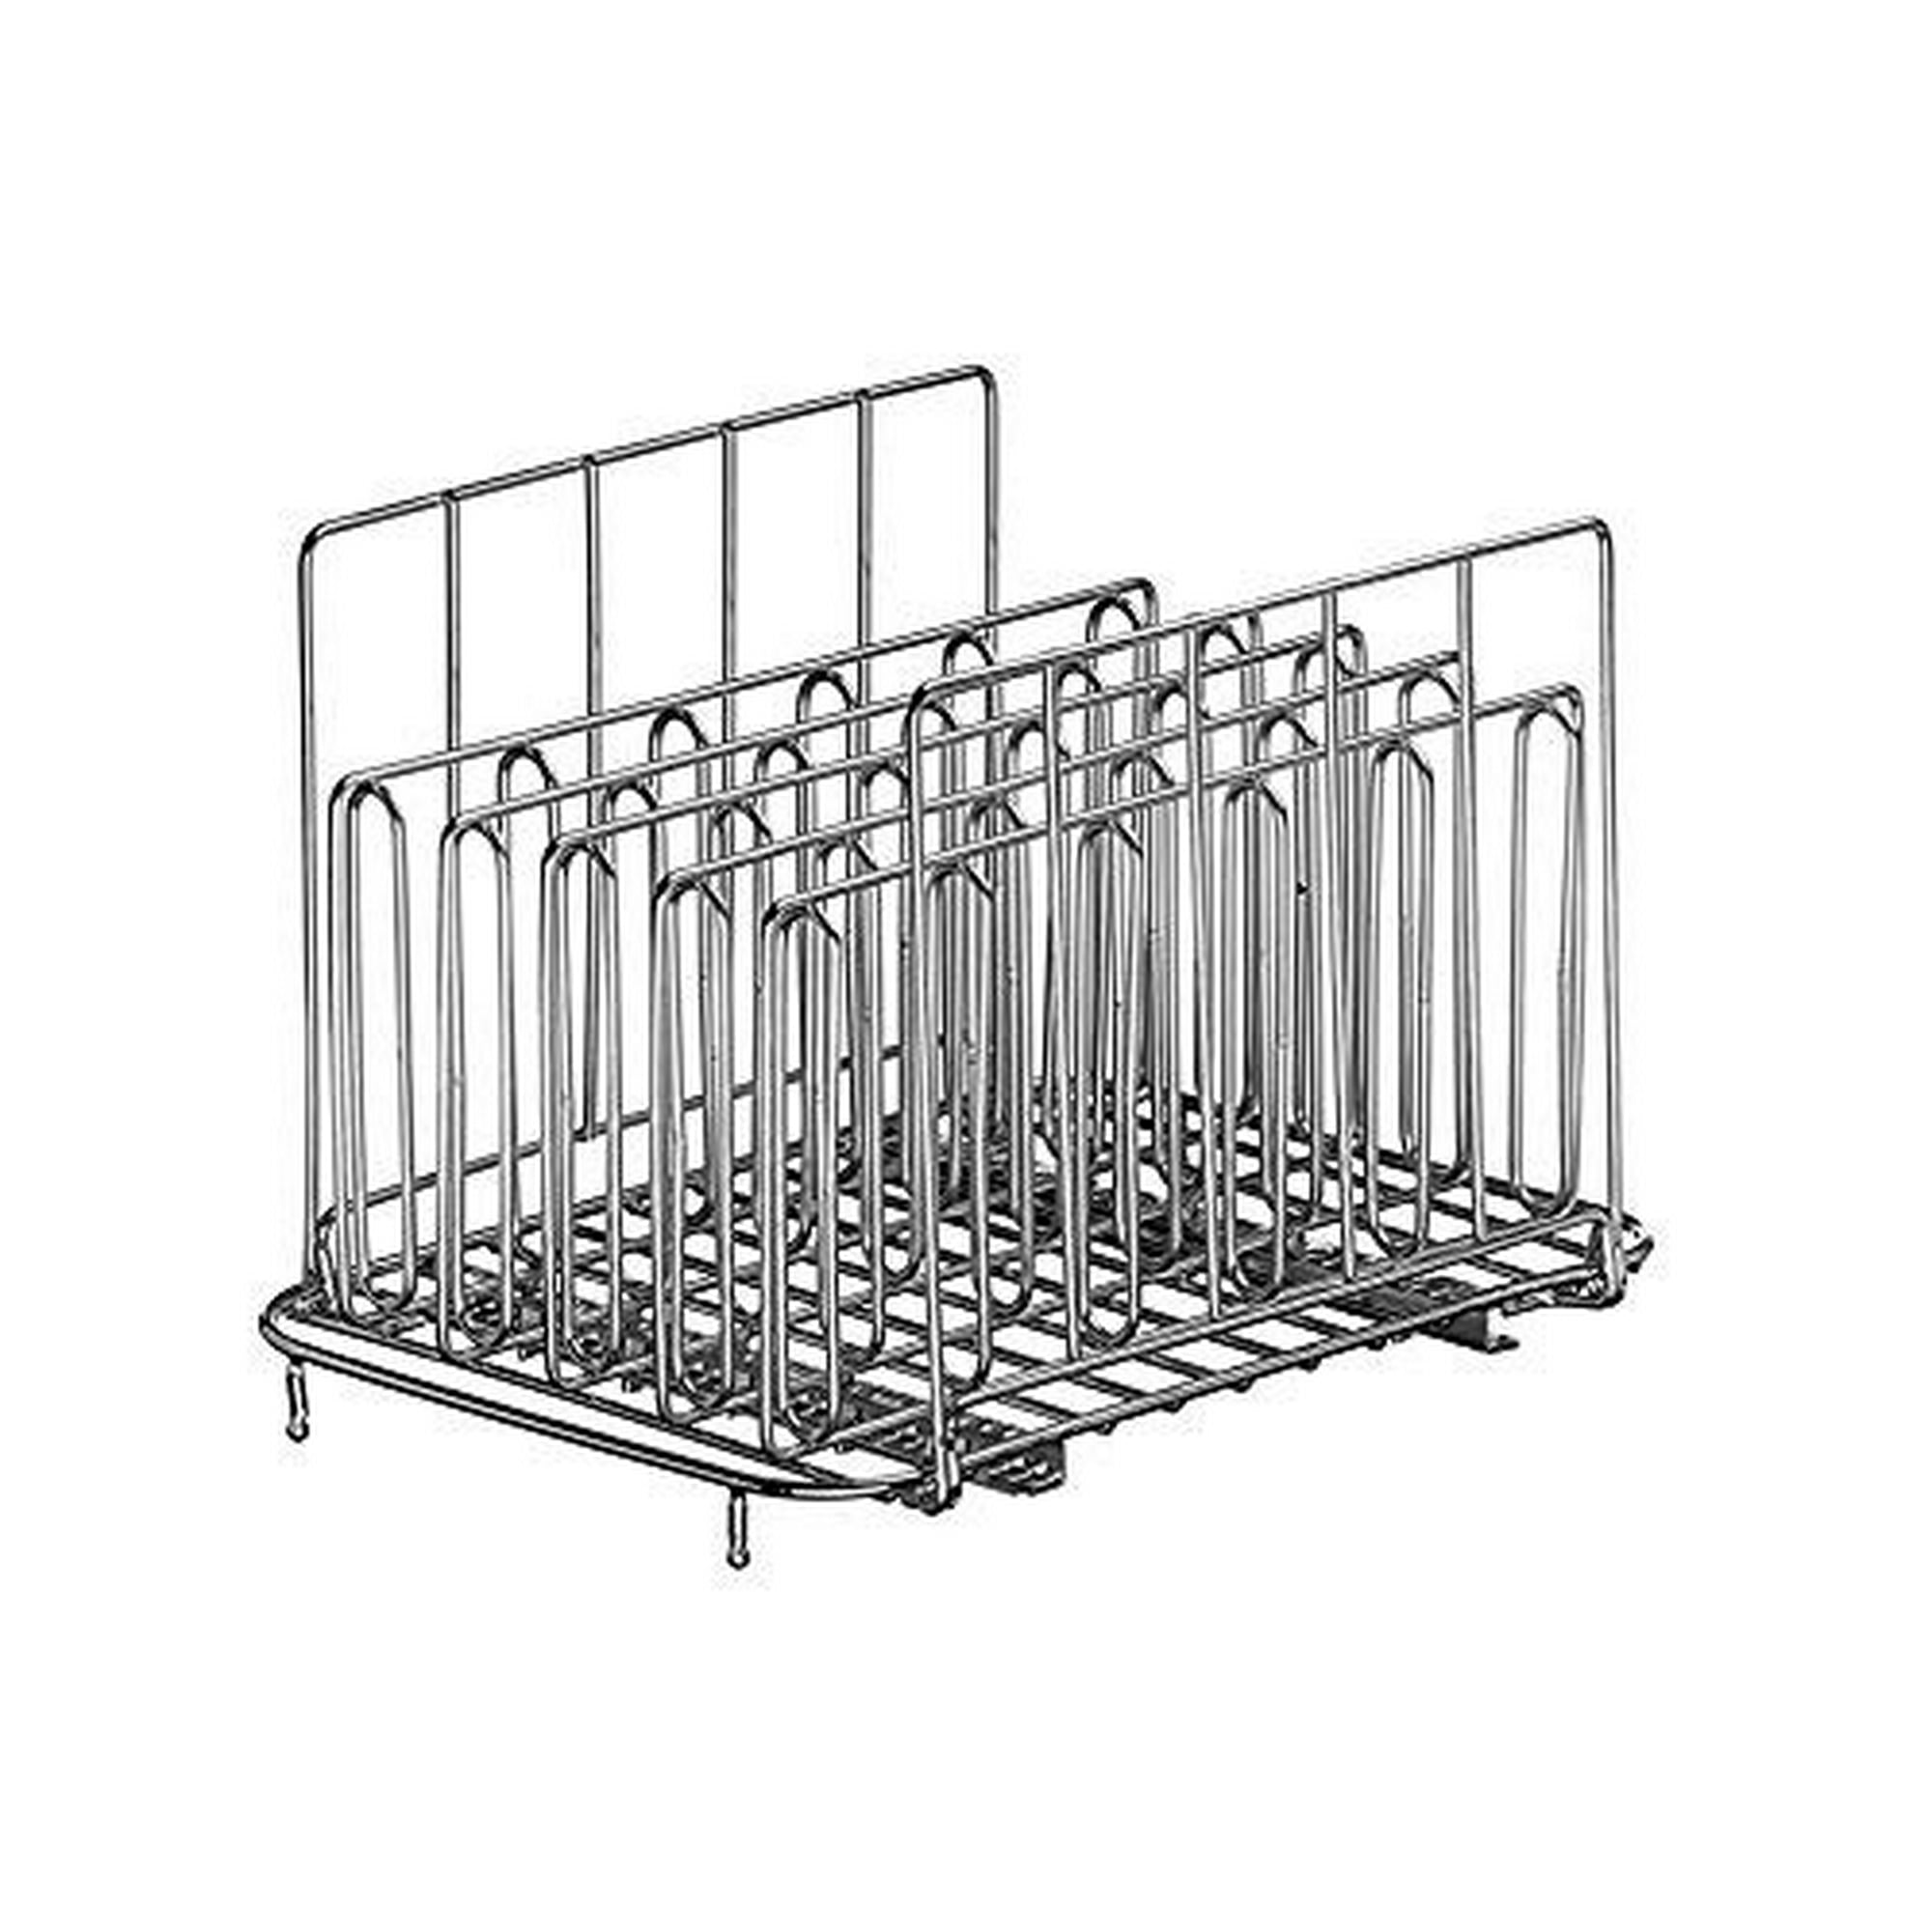 LIPAVI Sous Vide Rack - Model L15 - Marine Quality 316L Stainless Steel Square 10.8 x 8 Inch Adjustable, Collapsible, Ensures even and Quick warming - Fits LIPAVI C15 Container Canada